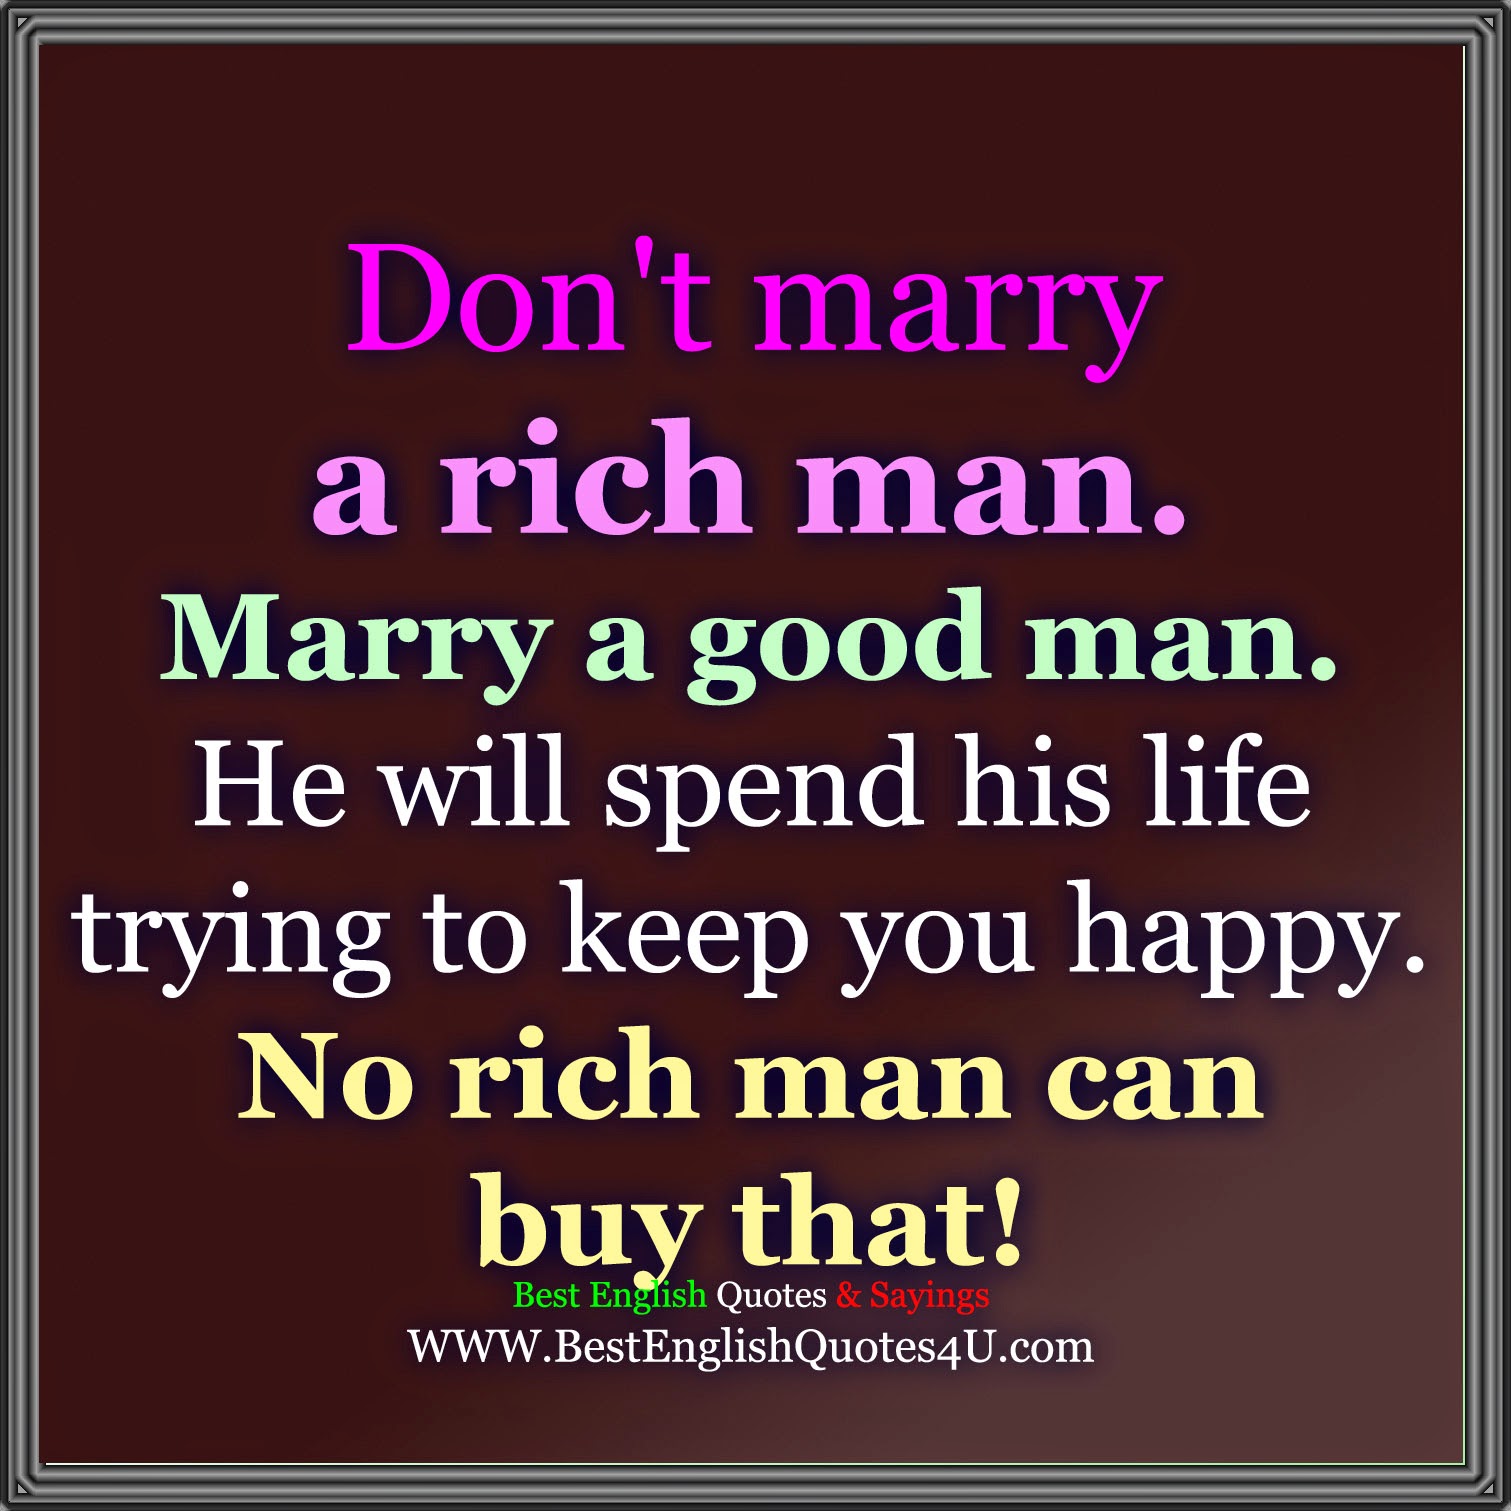 Don t marry a rich man Marry a good man He will spend his life trying to keep you happy No rich man can that